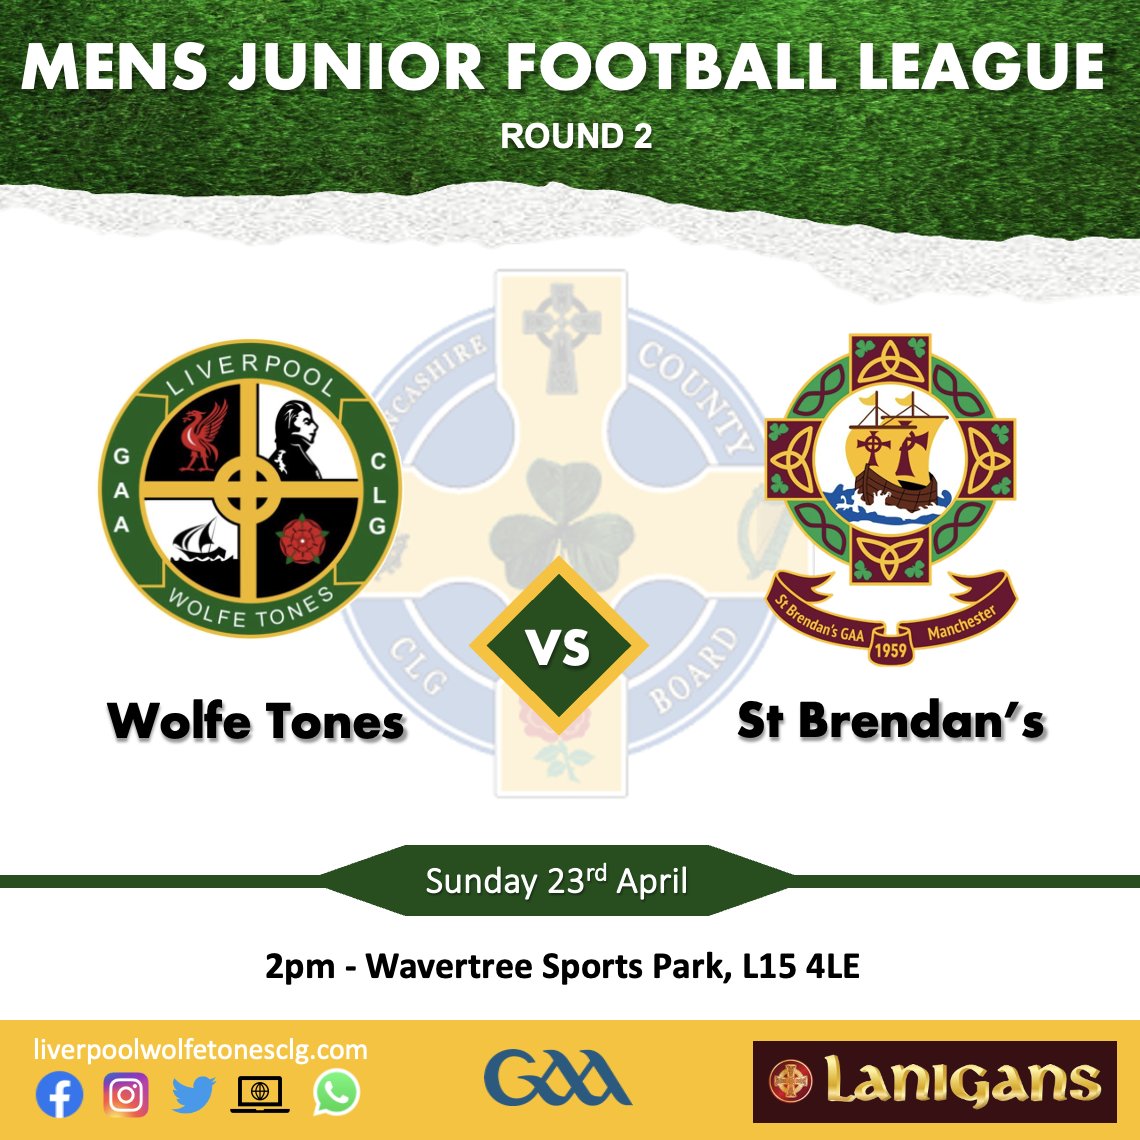 Our mens team continue their league from home this weekend, playing against St Brendan’s Manchester. Let’s get down and support the lads! Keep up to date at liverpoolwolfetonesclg.com